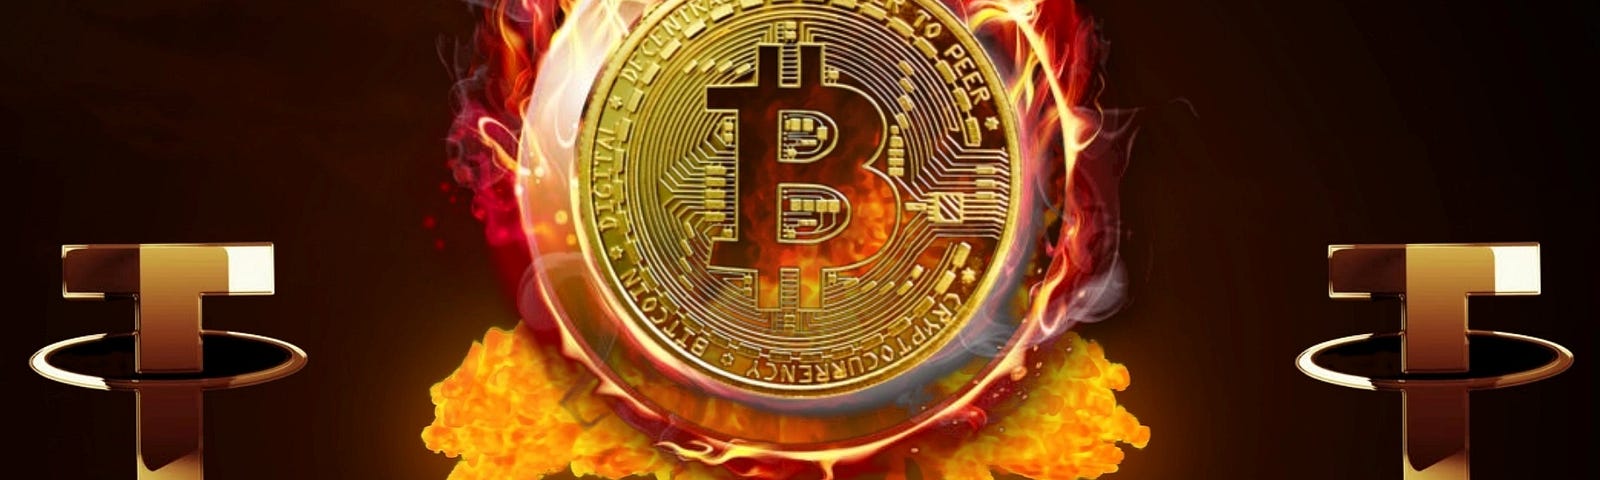 A nuclear explosion with dark (black) background, Bitcoin’s Symbol (golden and on fire) on top of the mushroom of the explosion, and two symbols of Tether (golden letter “T”) right and left of the Bitcoin symbol on the black background.